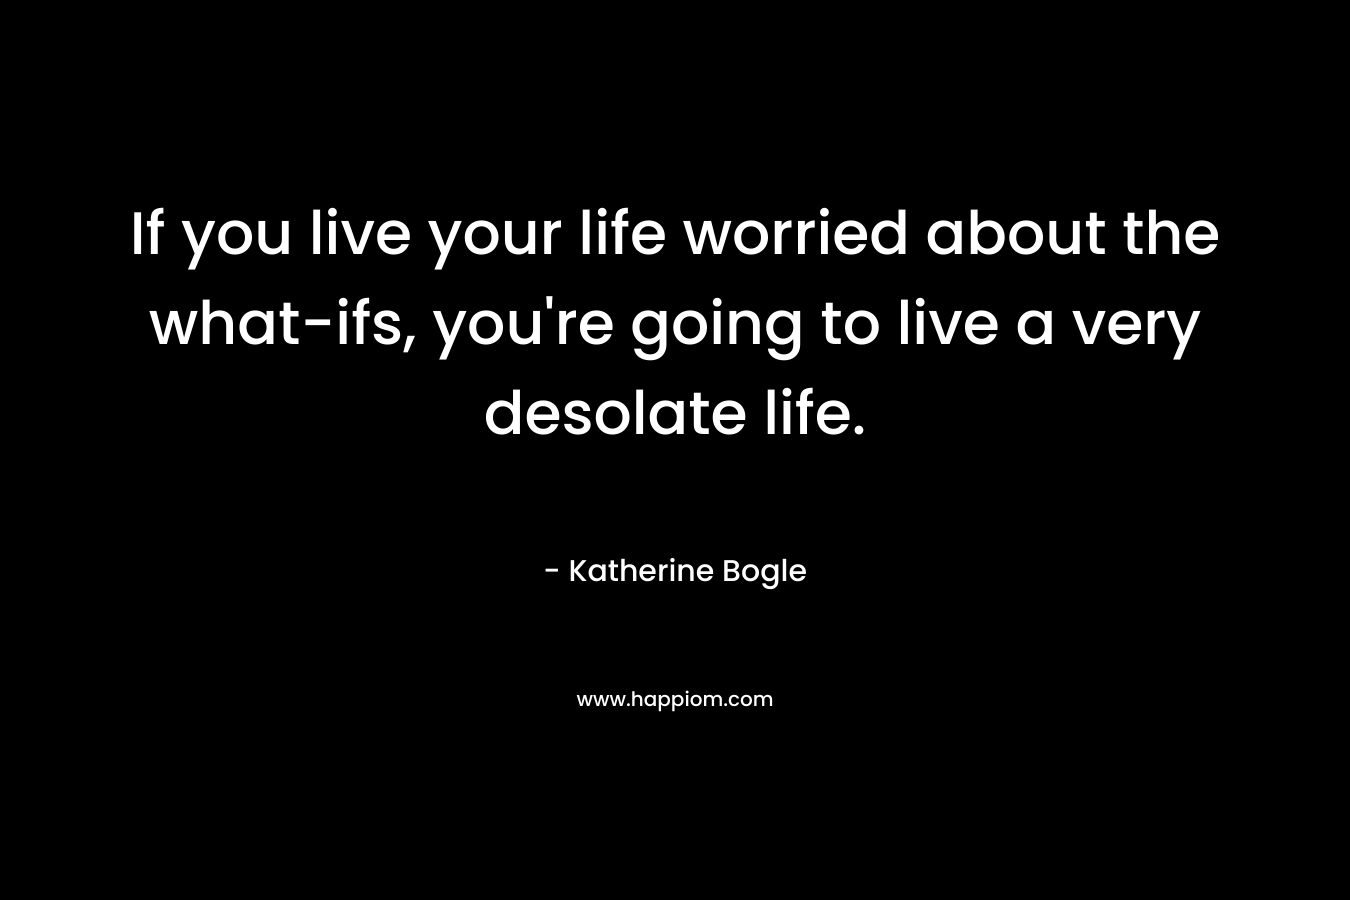 If you live your life worried about the what-ifs, you're going to live a very desolate life.